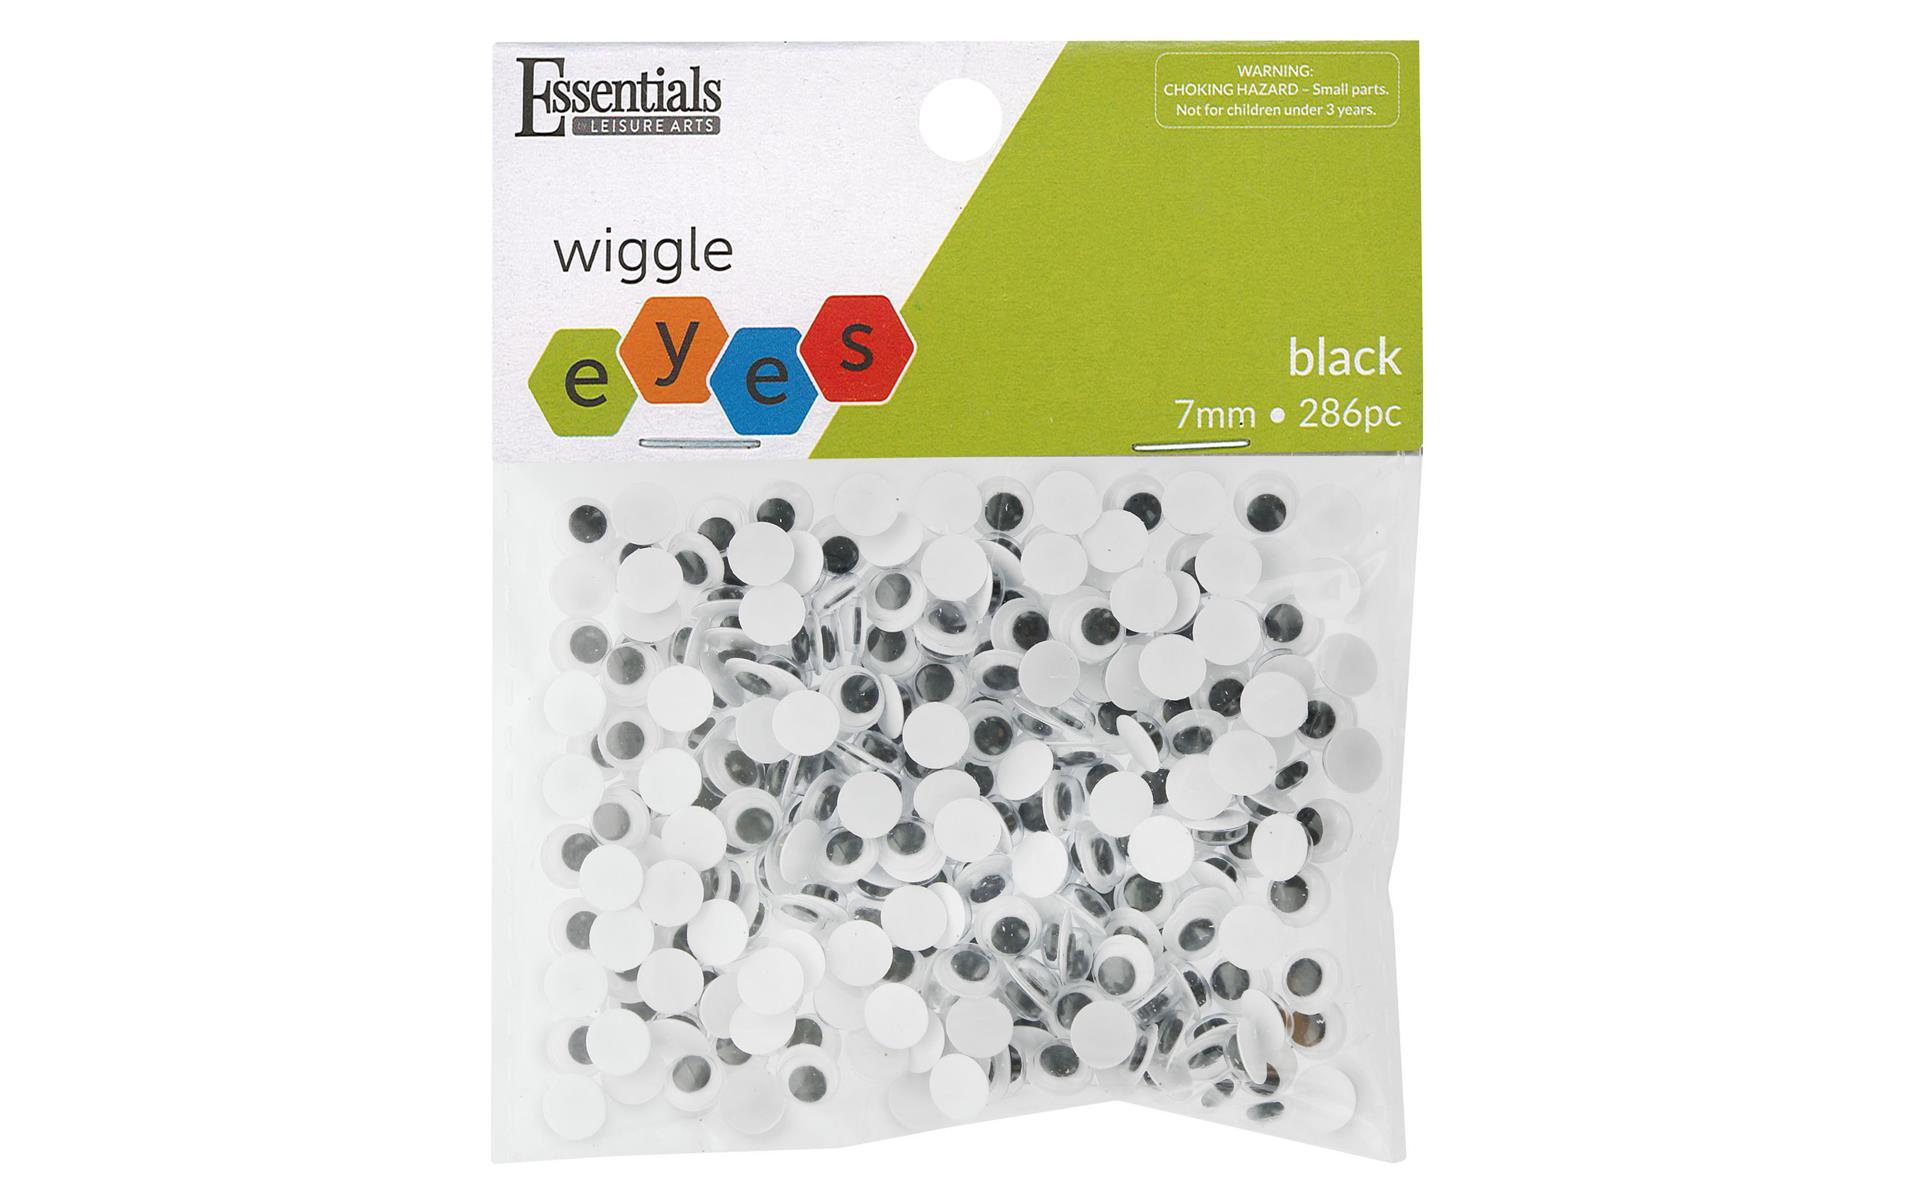 Essentials by Leisure Arts Eyes Paste On Moveable 7mm Black 286pc Googly  Eyes, Google Eyes for Crafts, Big Googly Eyes for Crafts, Wiggle Eyes,  Craft Eyes